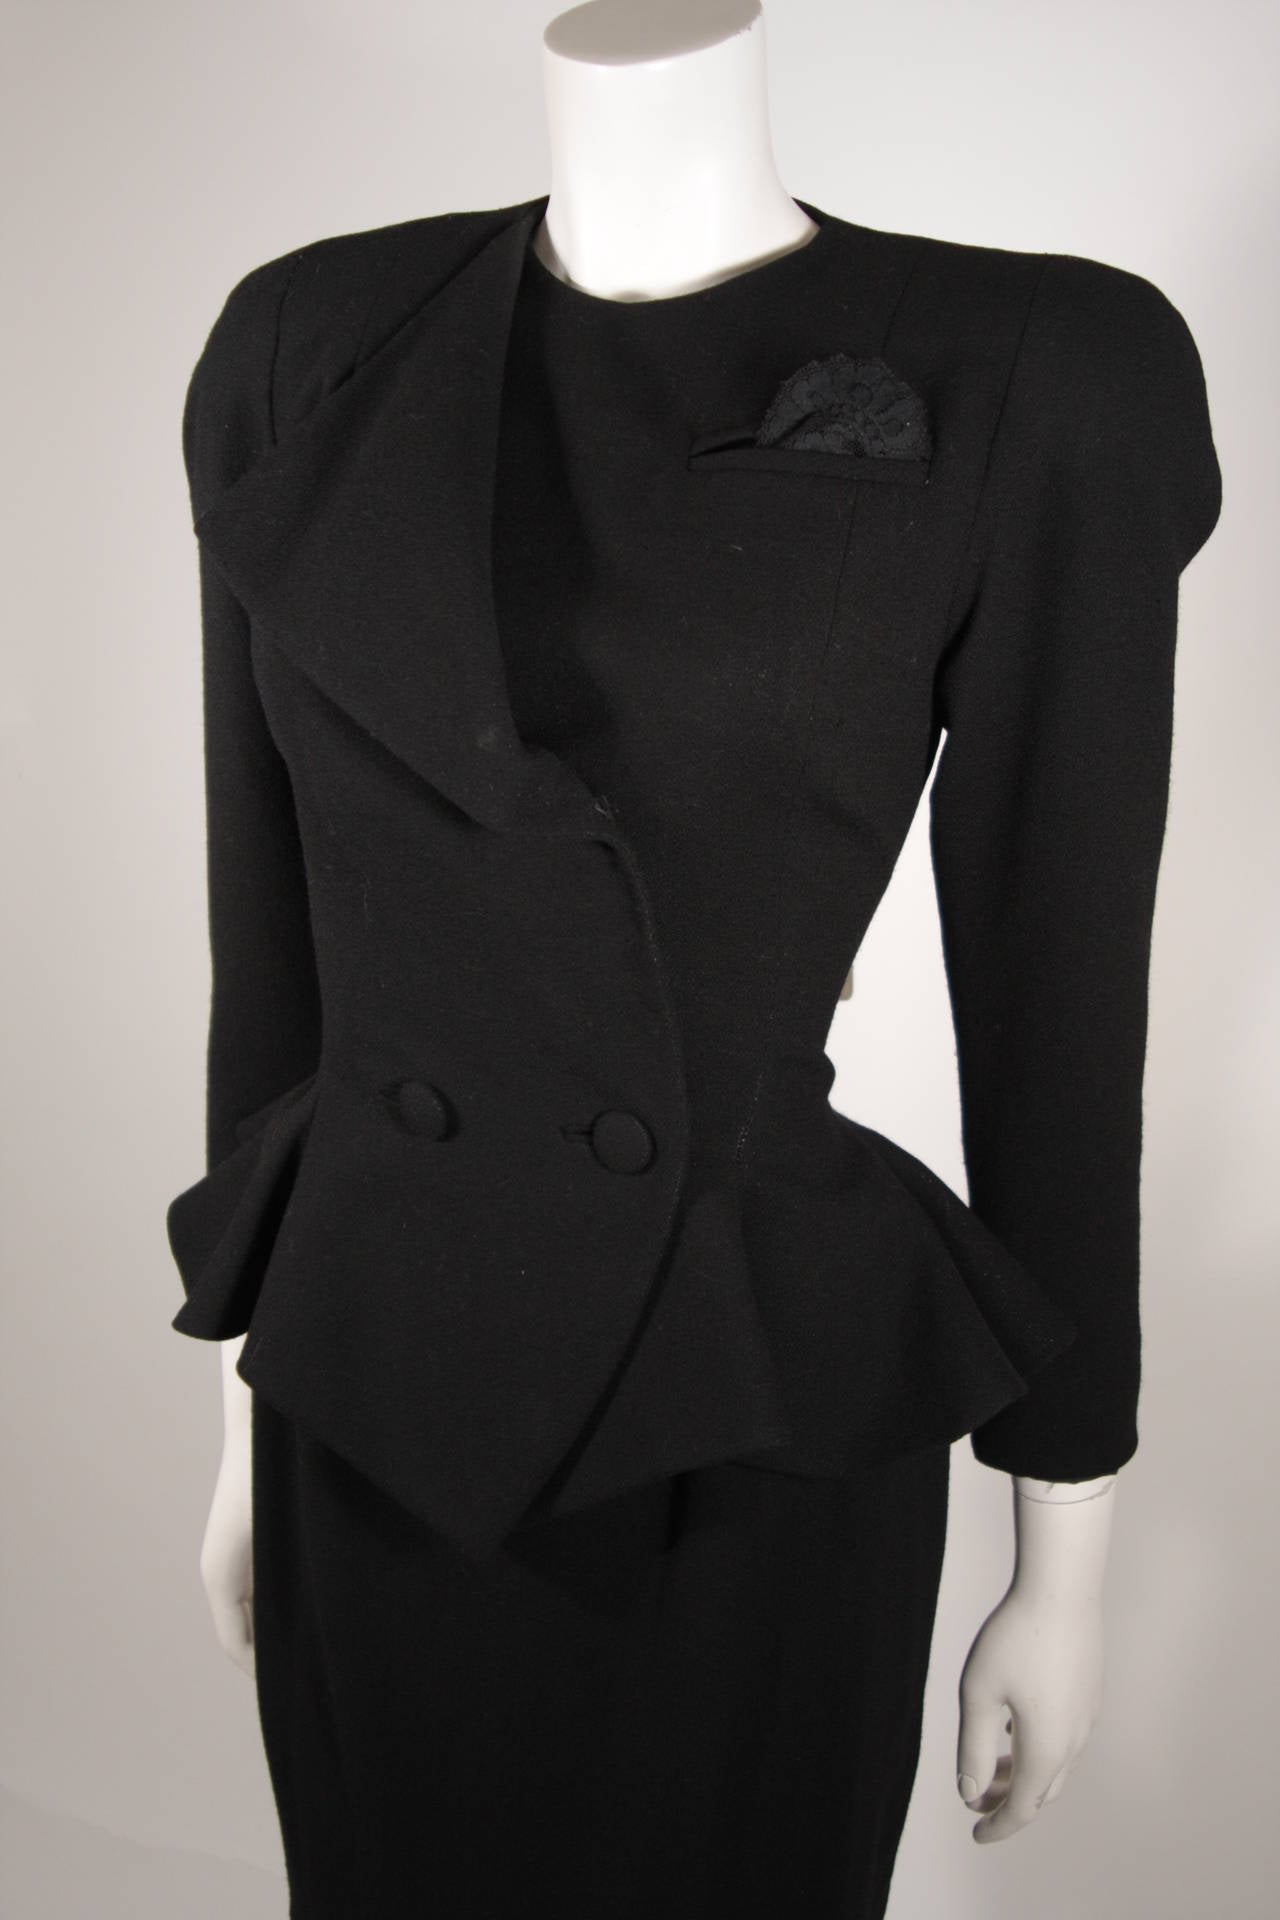 Travilla Black Structured Skirt Suit Size 8 In Excellent Condition For Sale In Los Angeles, CA